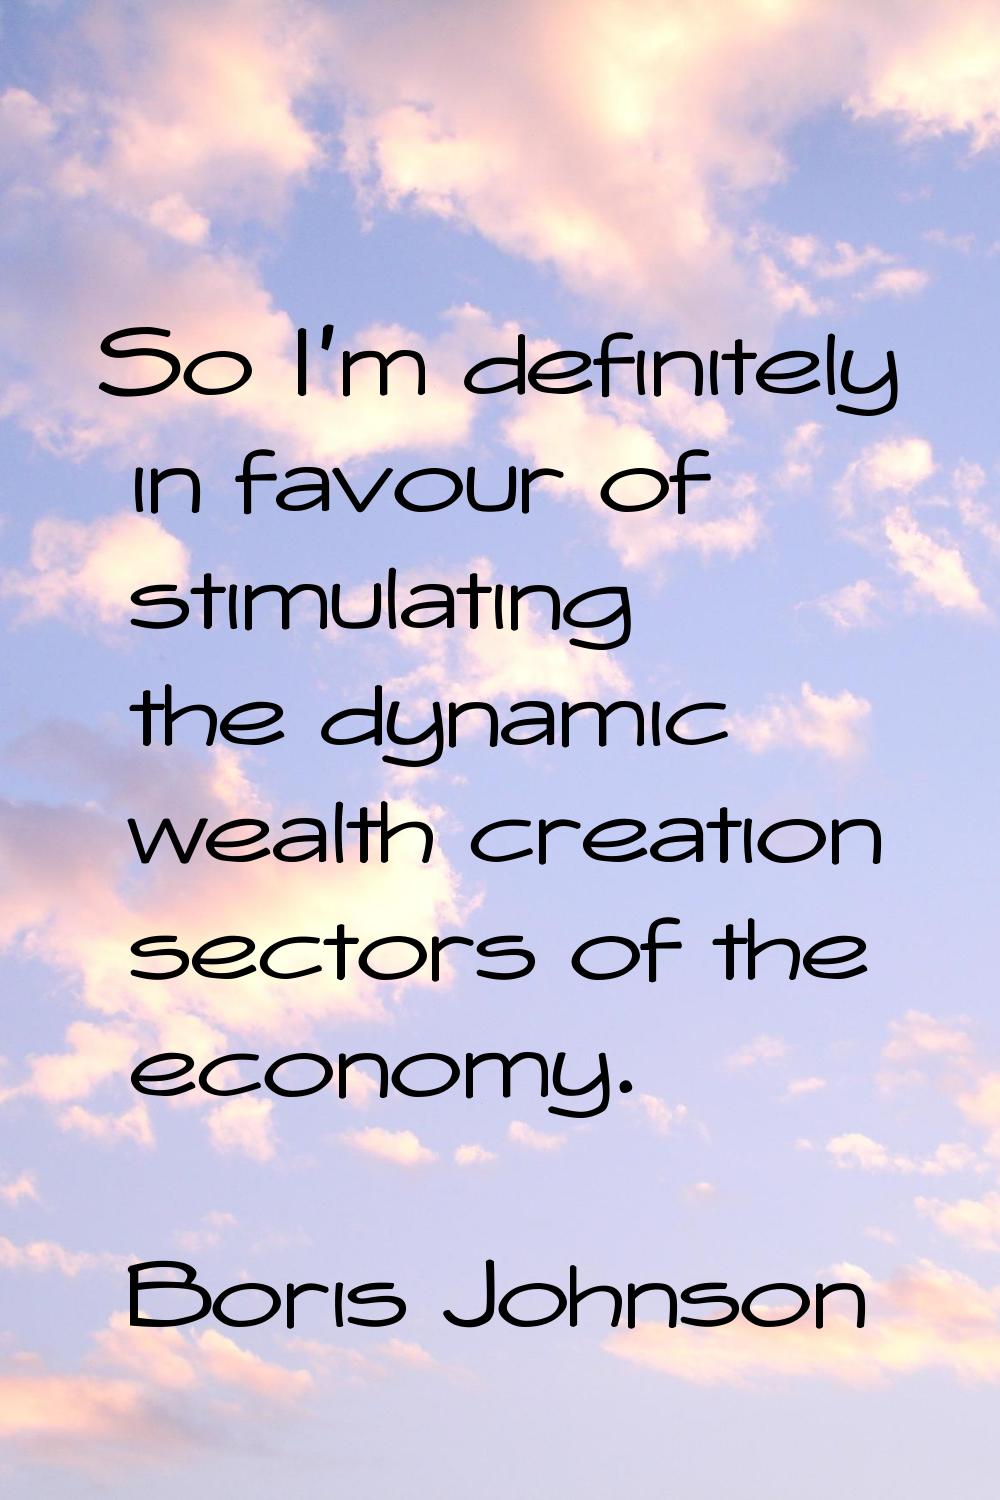 So I'm definitely in favour of stimulating the dynamic wealth creation sectors of the economy.